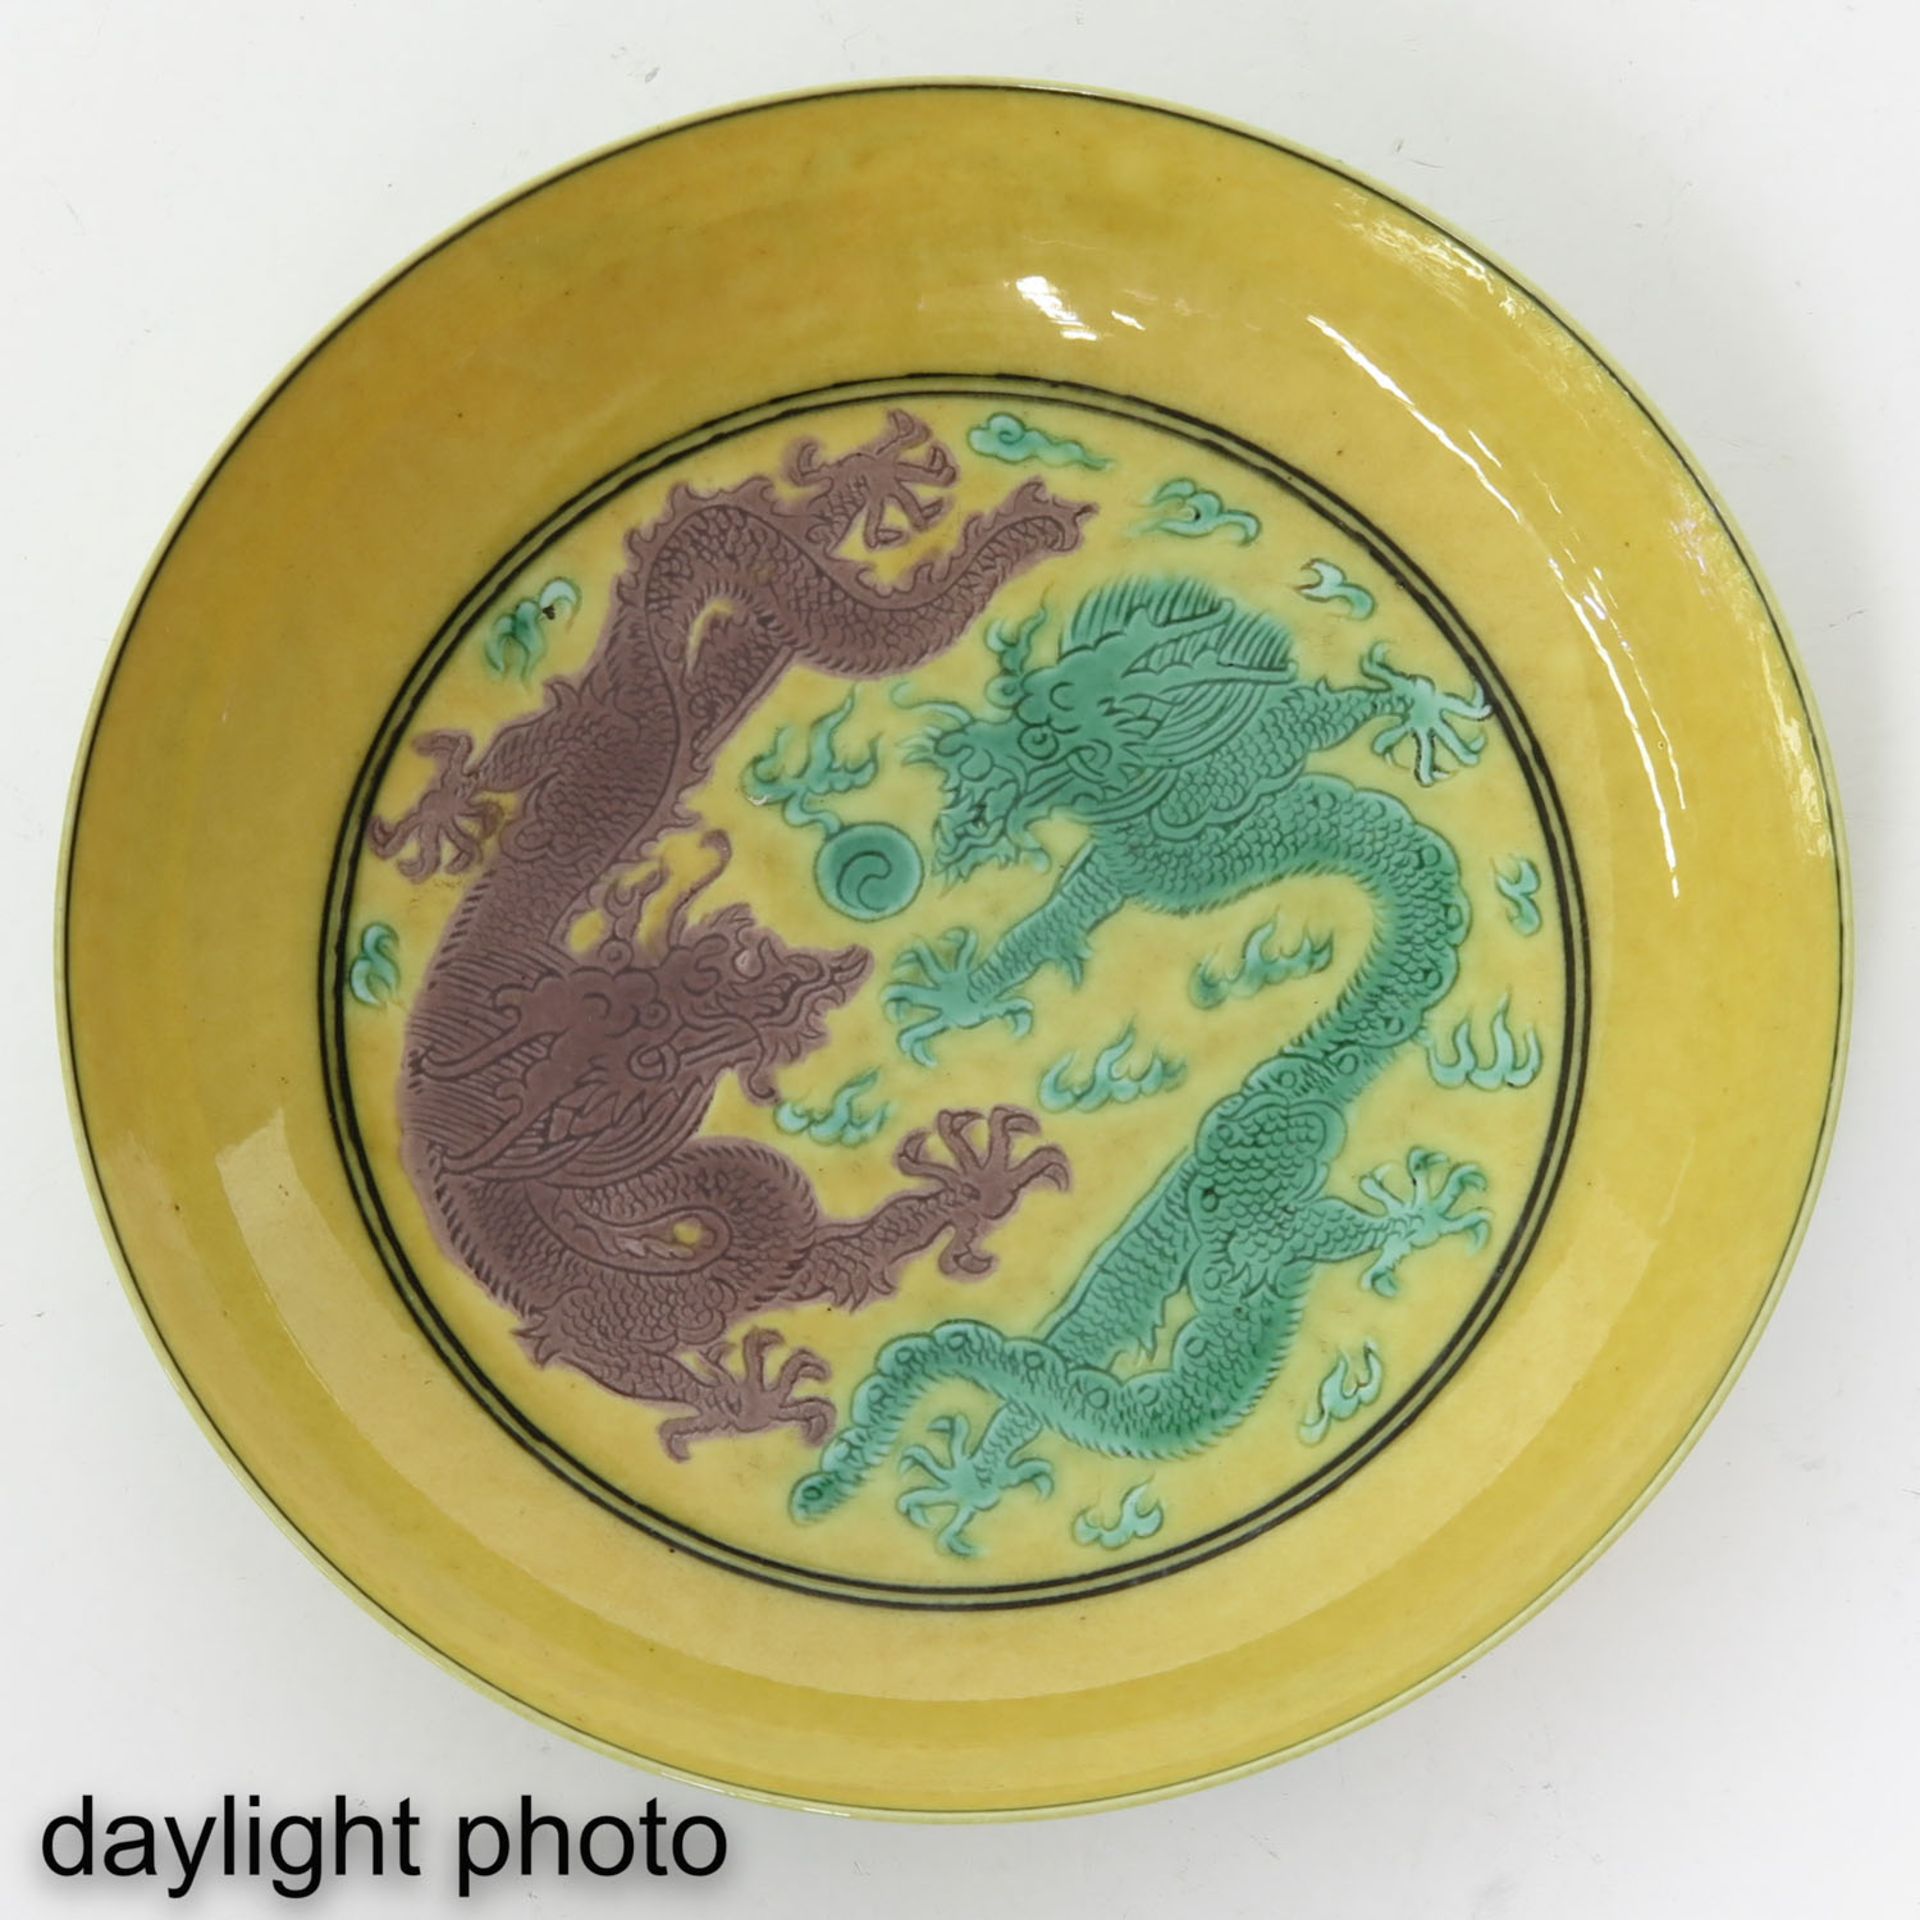 A Dragon and Cloud Decor Dish - Image 3 of 6